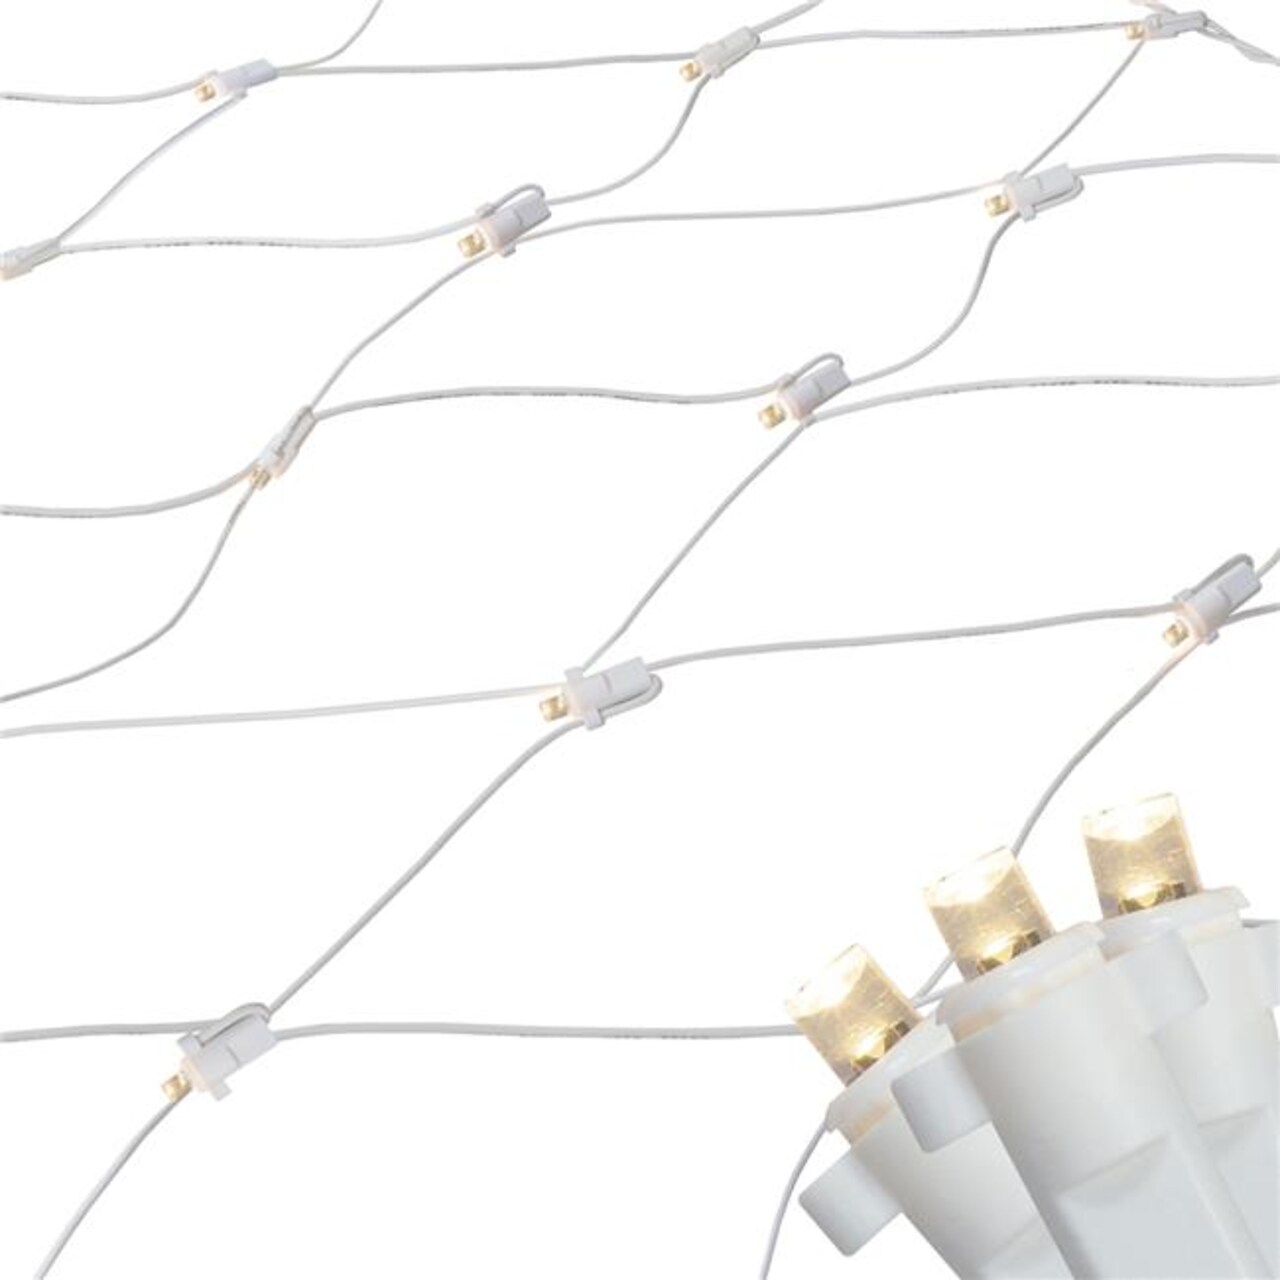 Northlight 34854968 4 x 6 ft. Warm White LED Wide Angle Net Style Christmas Lights with White Wire